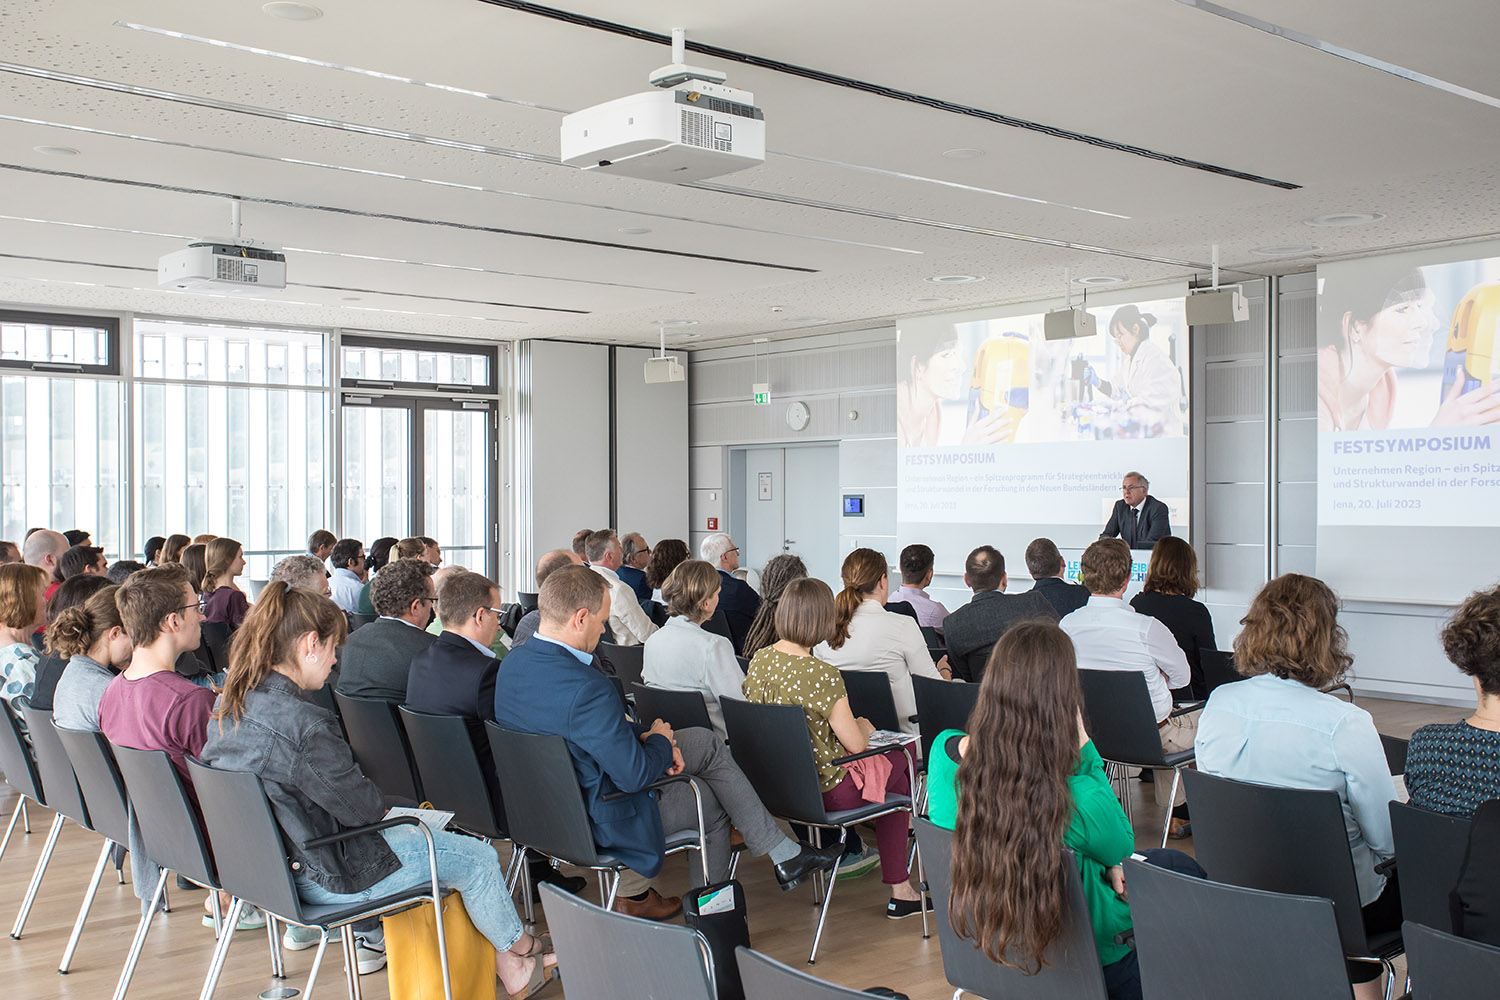 Keynote speech by Dr. Bernd Ebersold, Head of Department for Research, Technology and Innovation at the Thuringian Ministry of Economy, Science and Digital Society.